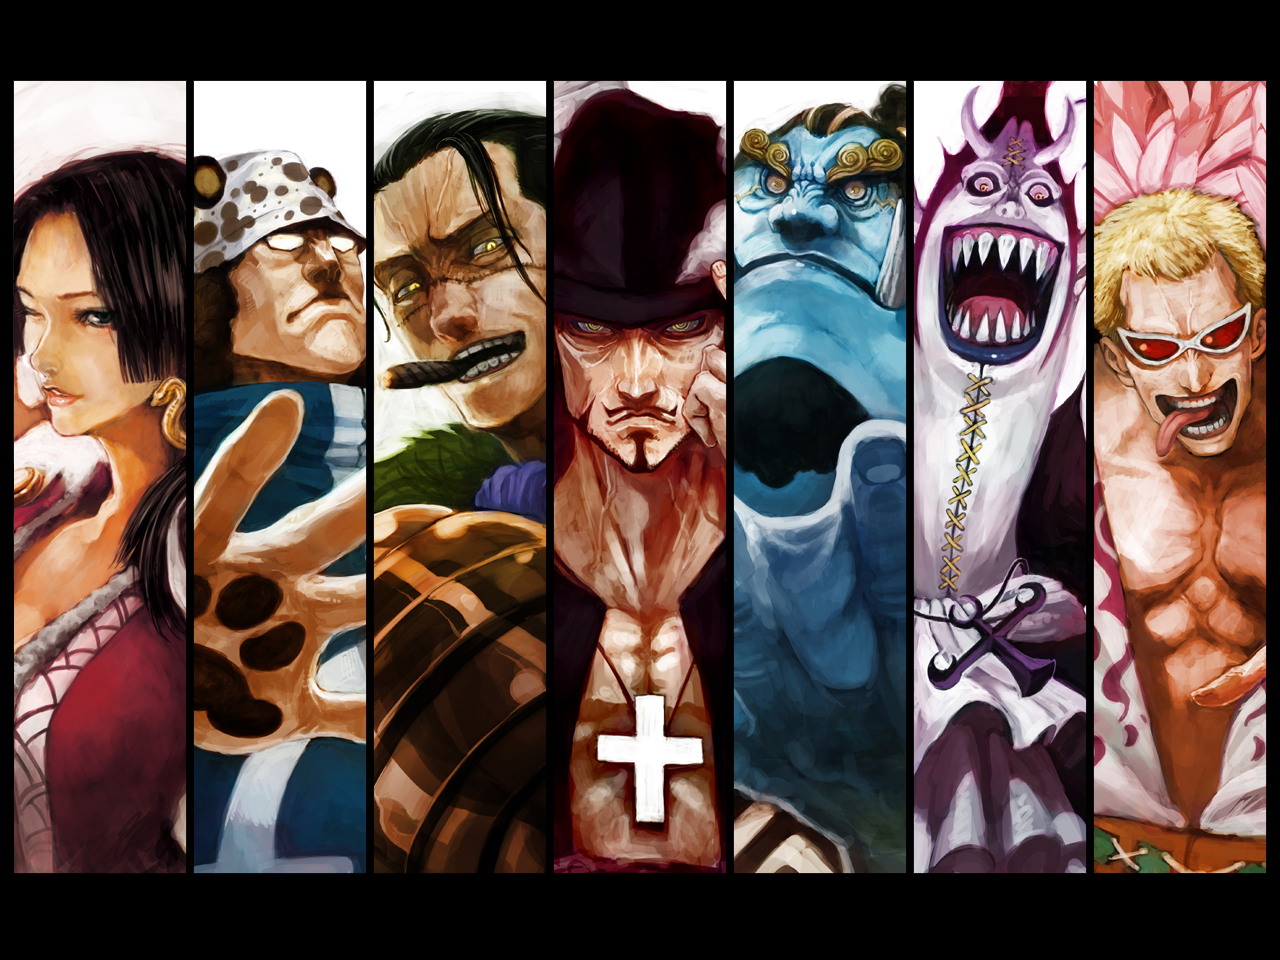 Does anyone have any Dual Monitor One Piece Wallpaper?